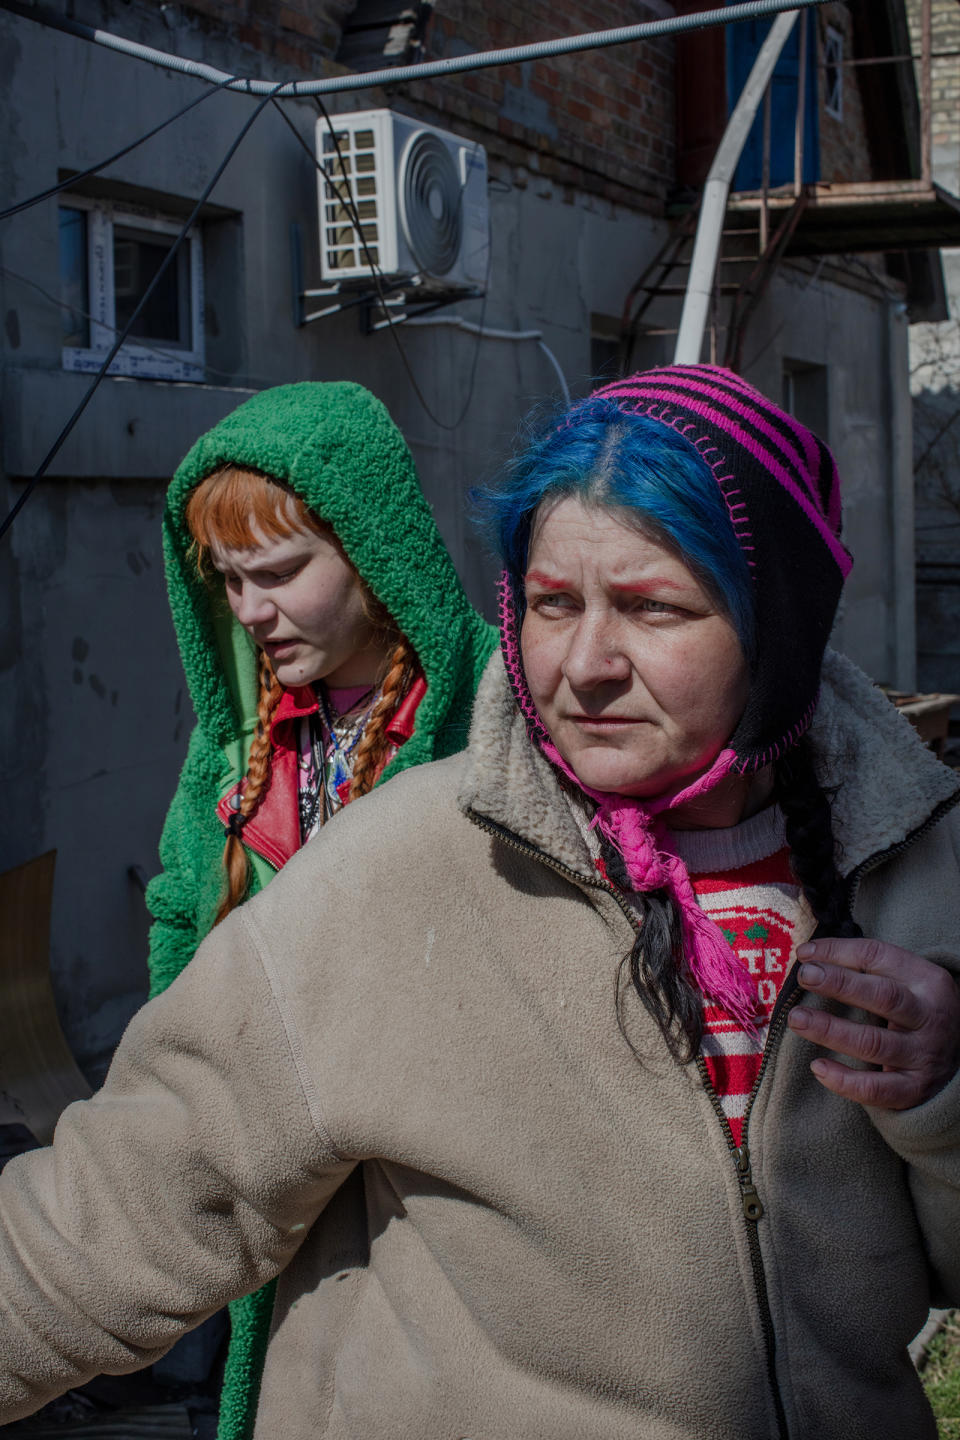 Gala and her daughter Veronika hid at home throughout the occupation in Bucha. Gala, with blue hair, said that the soldiers would come into her home twice a day threatening to kill them and terrorizing the neighborhood.<span class="copyright">Natalie Keyssar</span>